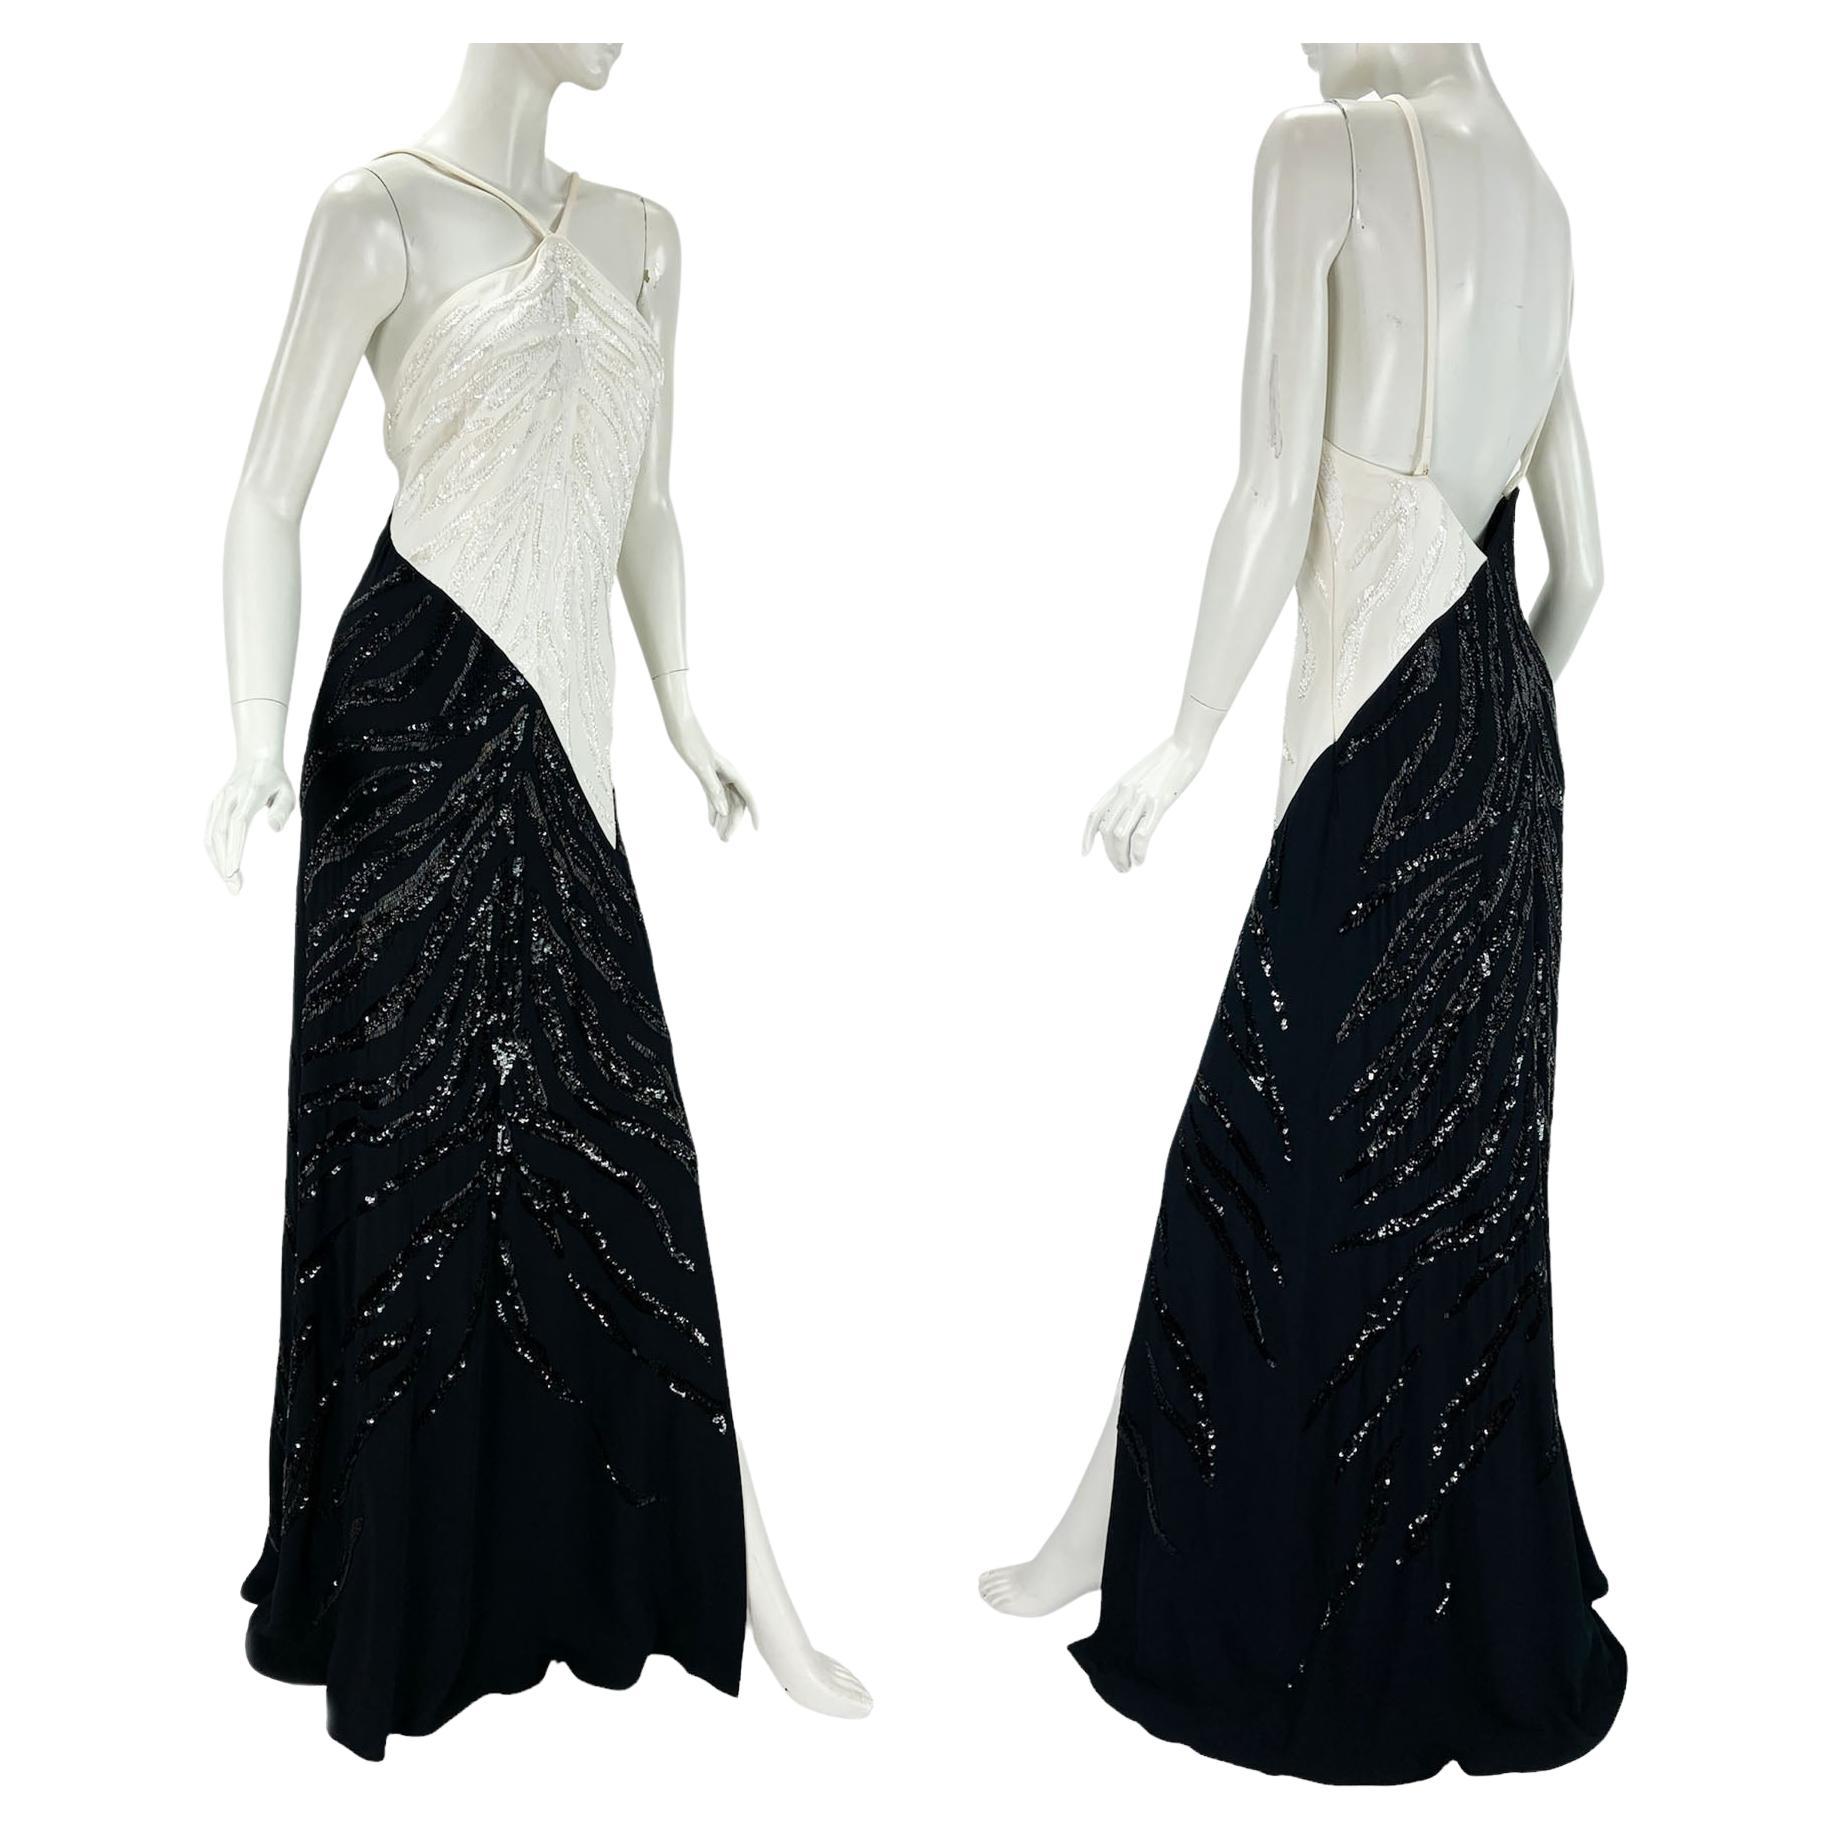 NWT Roberto Cavalli White Black Halter Embellished Maxi Dress Gown It 44 US 8/10 For Sale